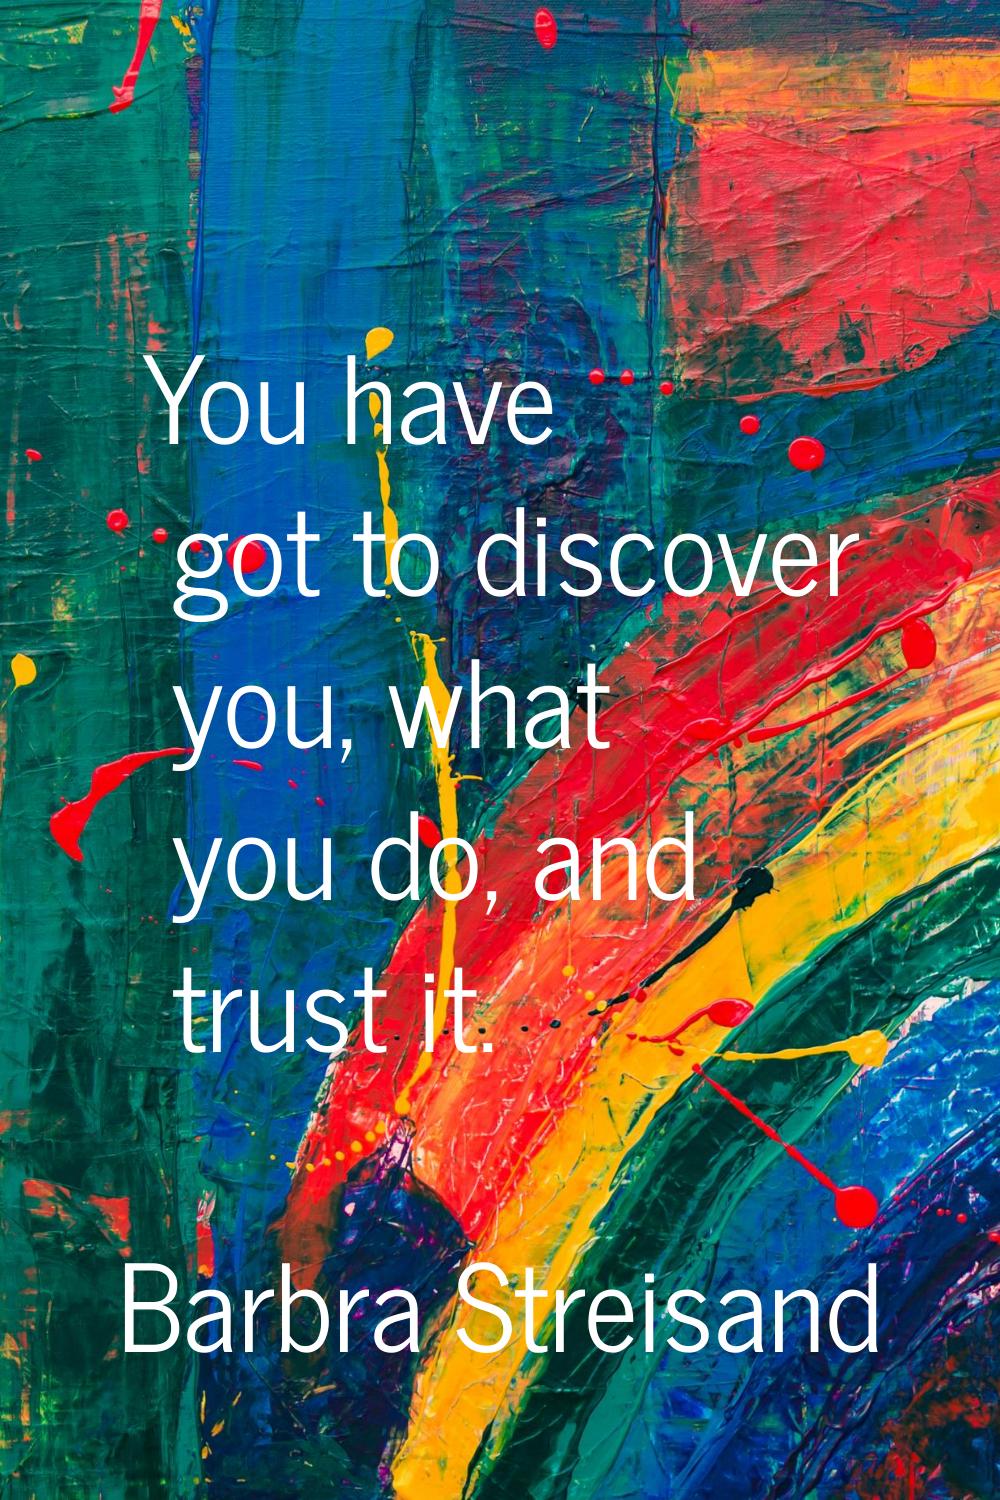 You have got to discover you, what you do, and trust it.